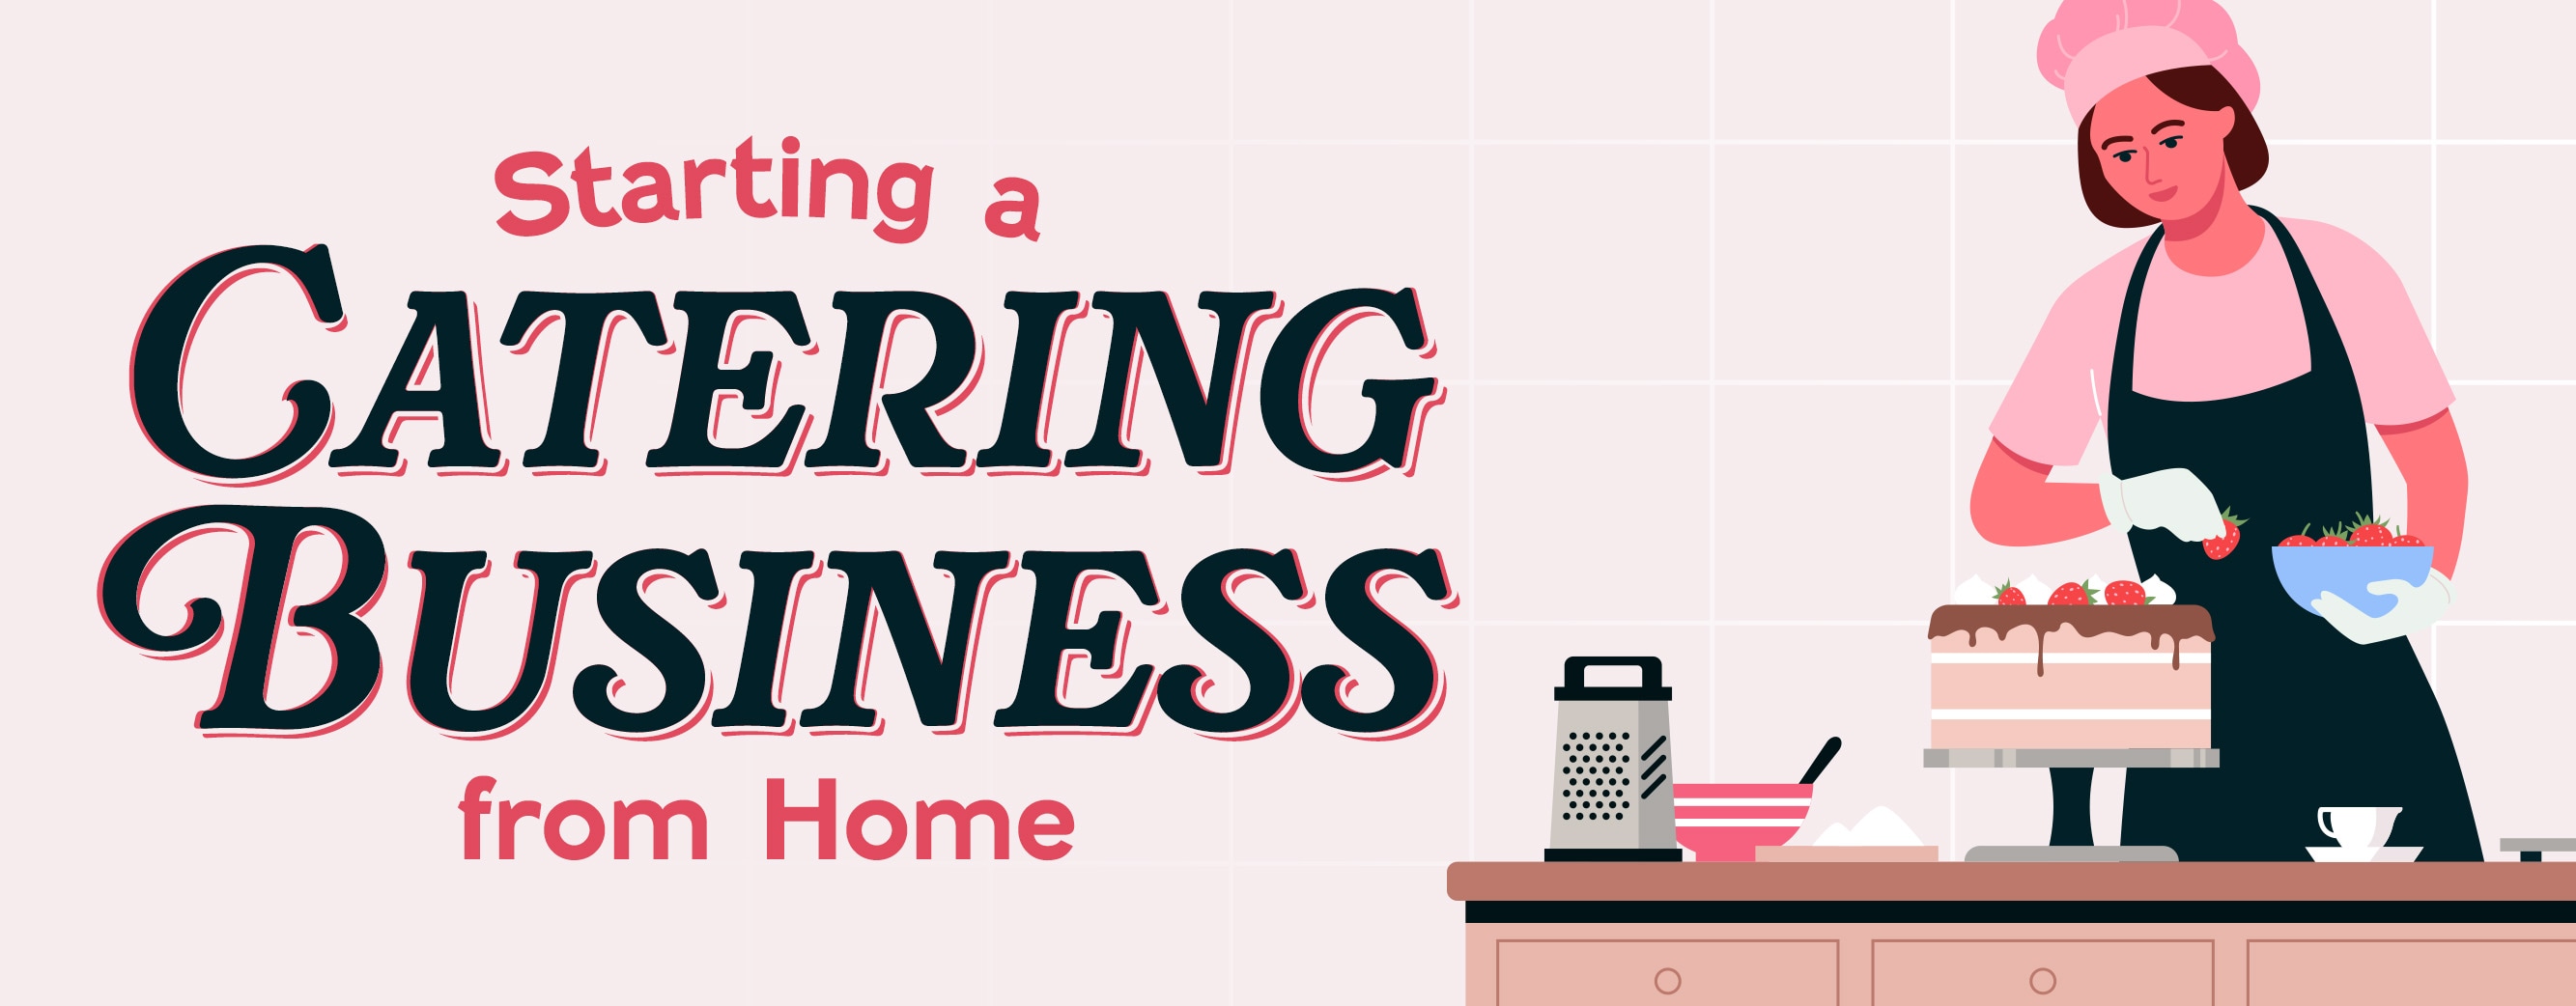 How to Start a Catering Business from Home 